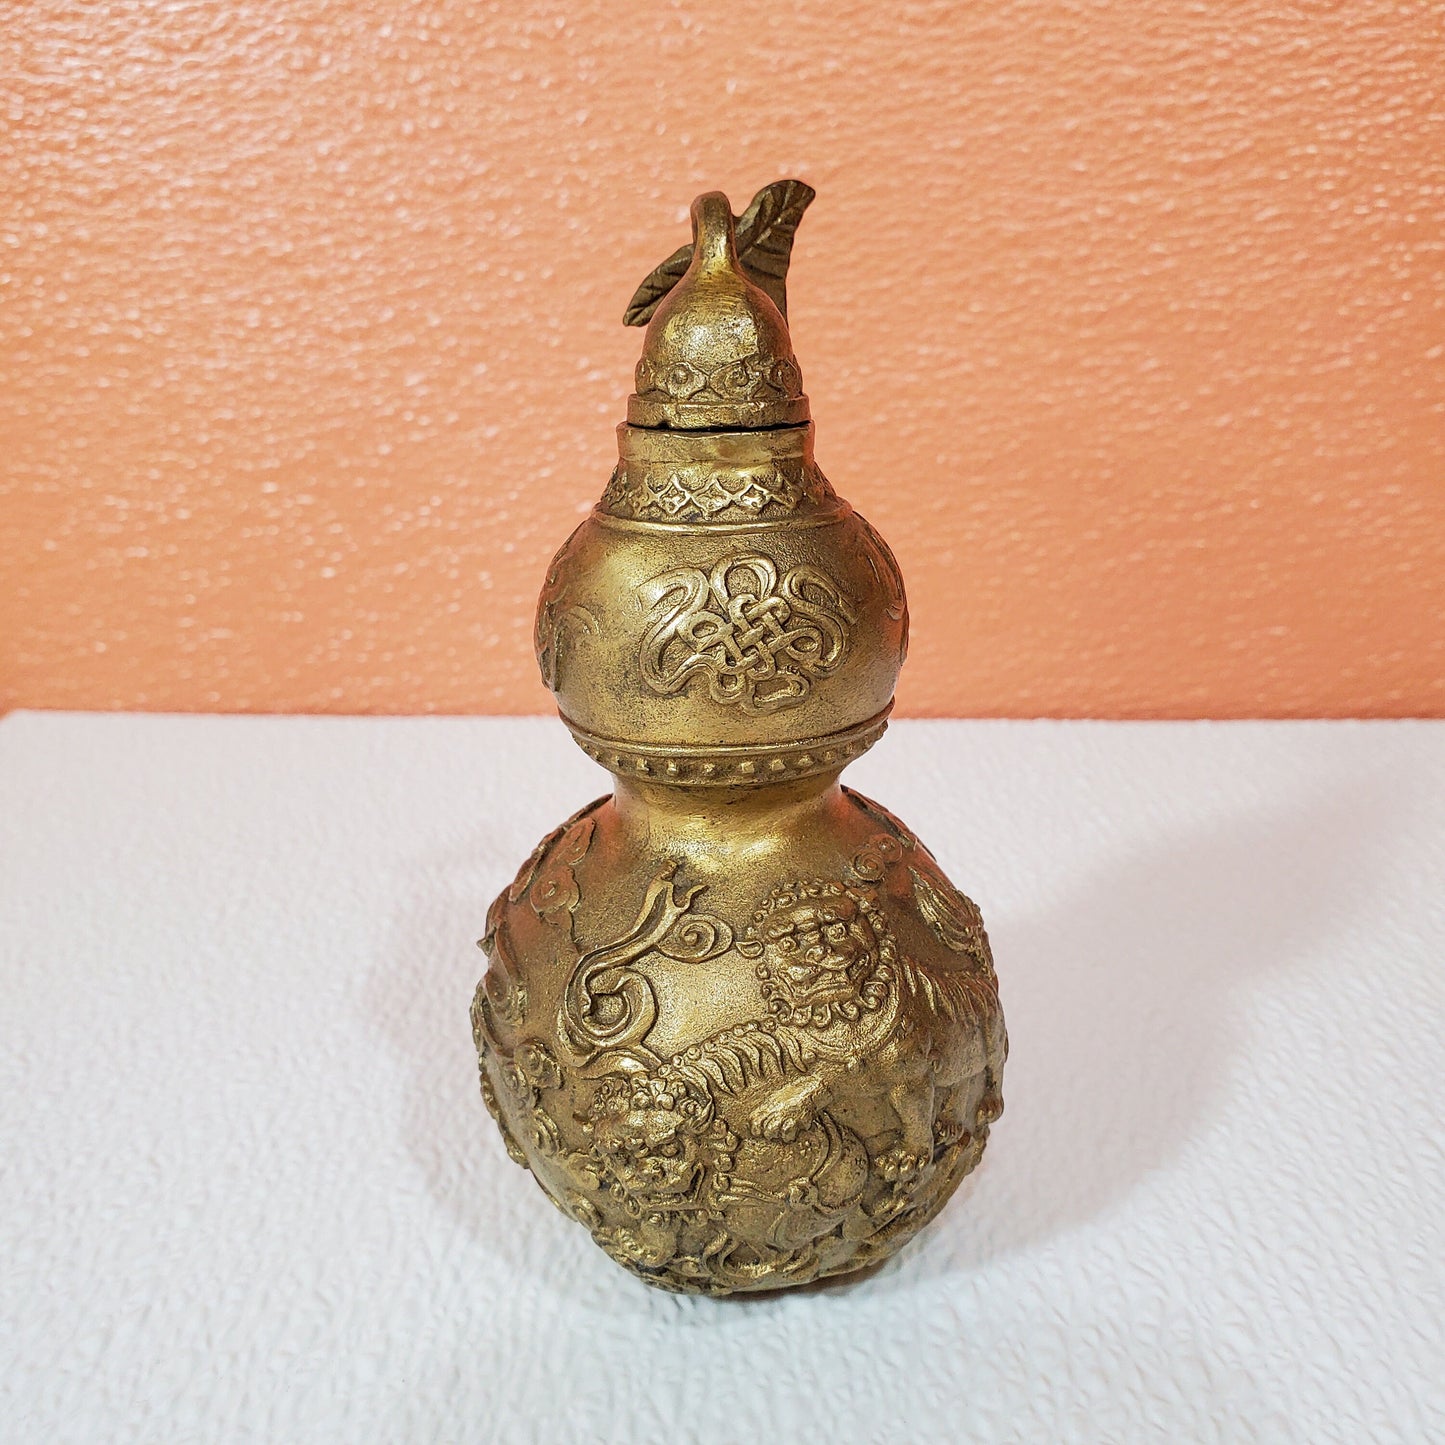 Chinese Feng Shui Brass Wu Lou Gourd Chinese Golding Bottle - Vintage Pair 5.5" Tall